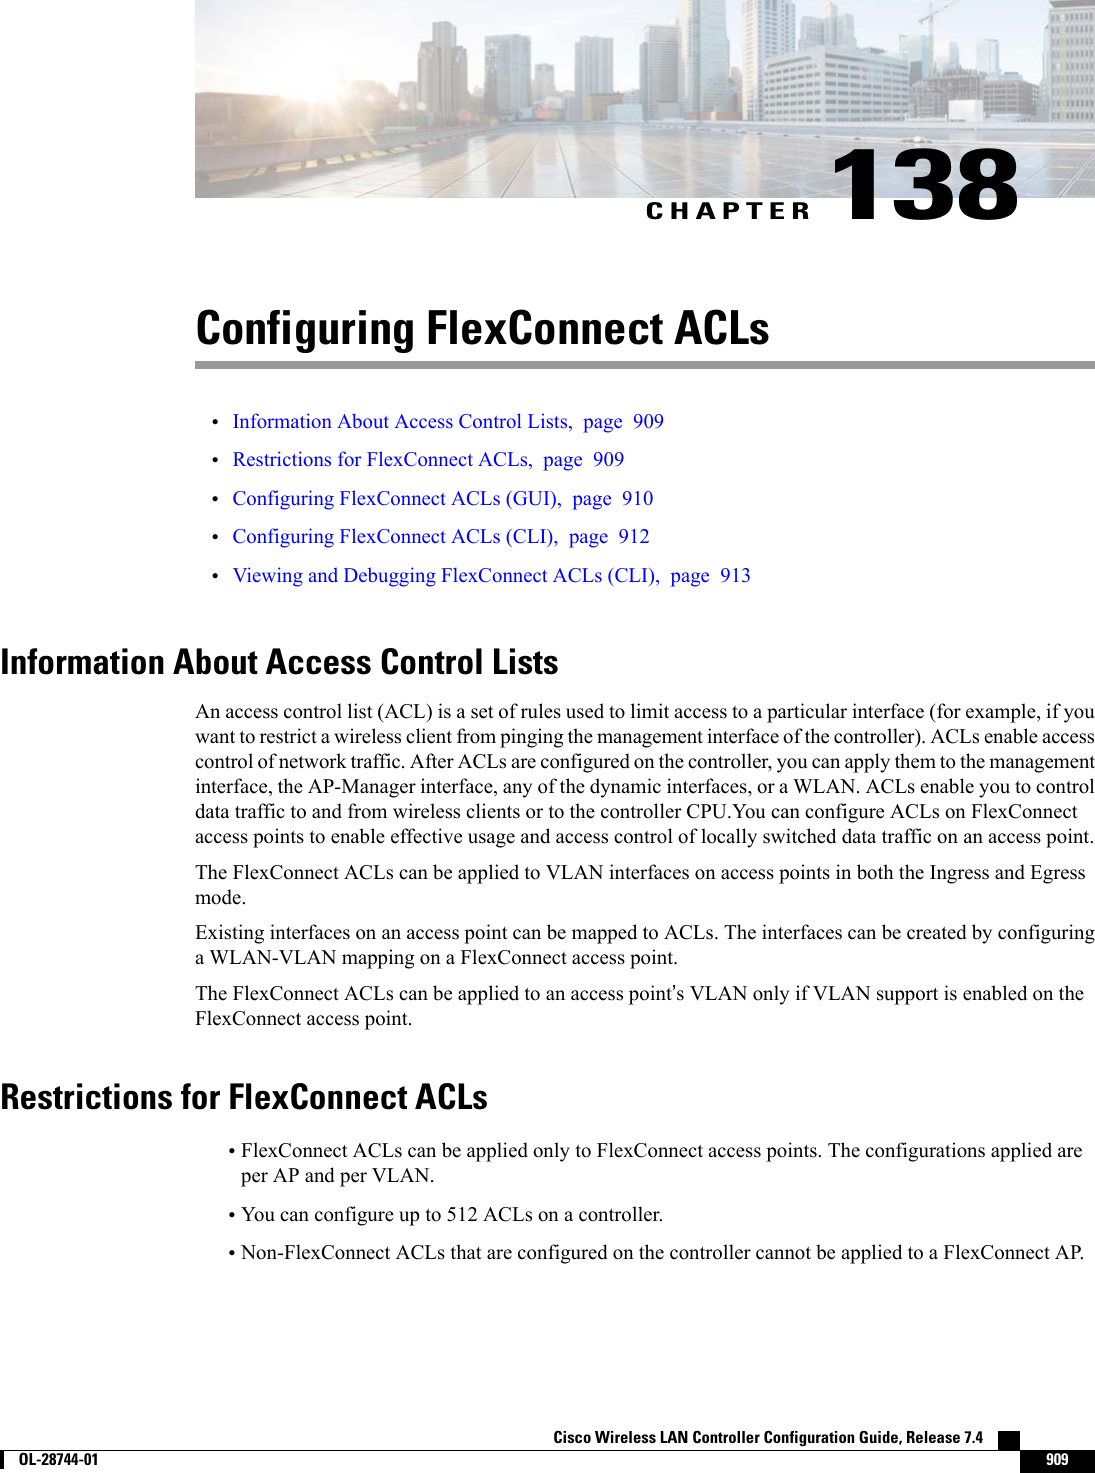 CHAPTER 138Configuring FlexConnect ACLs•Information About Access Control Lists, page 909•Restrictions for FlexConnect ACLs, page 909•Configuring FlexConnect ACLs (GUI), page 910•Configuring FlexConnect ACLs (CLI), page 912•Viewing and Debugging FlexConnect ACLs (CLI), page 913Information About Access Control ListsAn access control list (ACL) is a set of rules used to limit access to a particular interface (for example, if youwant to restrict a wireless client from pinging the management interface of the controller). ACLs enable accesscontrol of network traffic. After ACLs are configured on the controller, you can apply them to the managementinterface, the AP-Manager interface, any of the dynamic interfaces, or a WLAN. ACLs enable you to controldata traffic to and from wireless clients or to the controller CPU.You can configure ACLs on FlexConnectaccess points to enable effective usage and access control of locally switched data traffic on an access point.The FlexConnect ACLs can be applied to VLAN interfaces on access points in both the Ingress and Egressmode.Existing interfaces on an access point can be mapped to ACLs. The interfaces can be created by configuringa WLAN-VLAN mapping on a FlexConnect access point.The FlexConnect ACLs can be applied to an access point’s VLAN only if VLAN support is enabled on theFlexConnect access point.Restrictions for FlexConnect ACLs•FlexConnect ACLs can be applied only to FlexConnect access points. The configurations applied areper AP and per VLAN.•You can configure up to 512 ACLs on a controller.•Non-FlexConnect ACLs that are configured on the controller cannot be applied to a FlexConnect AP.Cisco Wireless LAN Controller Configuration Guide, Release 7.4        OL-28744-01 909